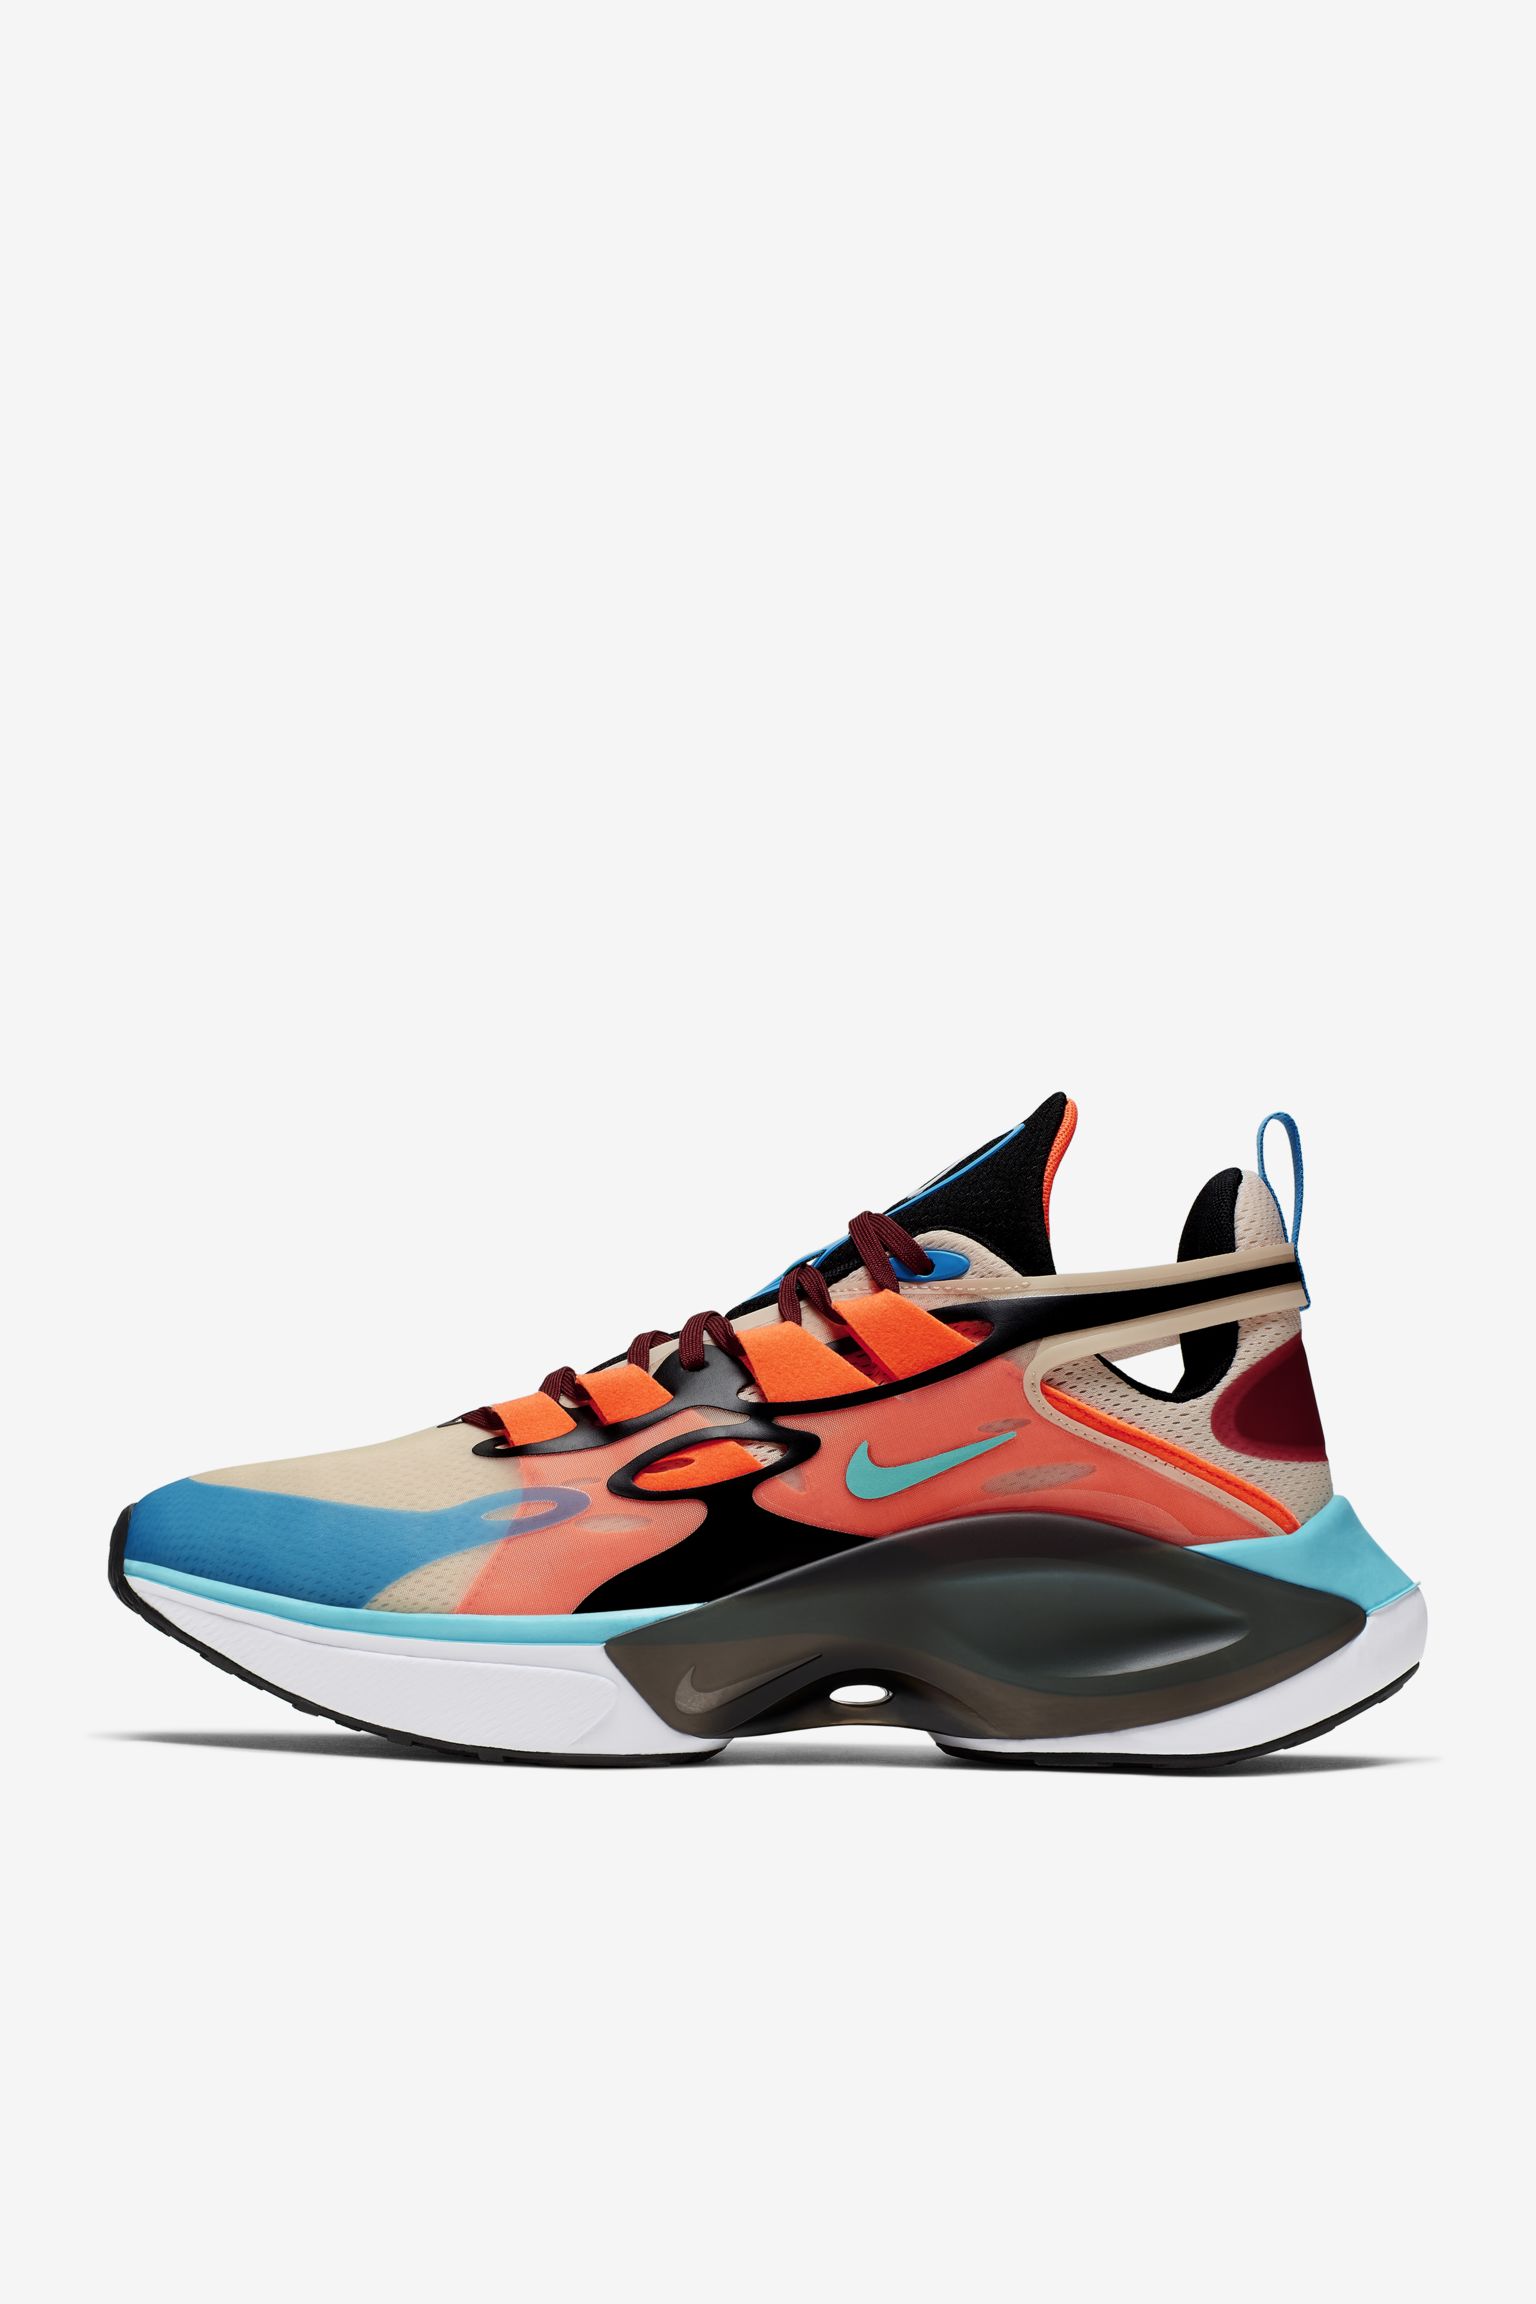 systematisch Melbourne logica N110 D/MS/X 'Dimsix' 発売日. Nike SNKRS JP